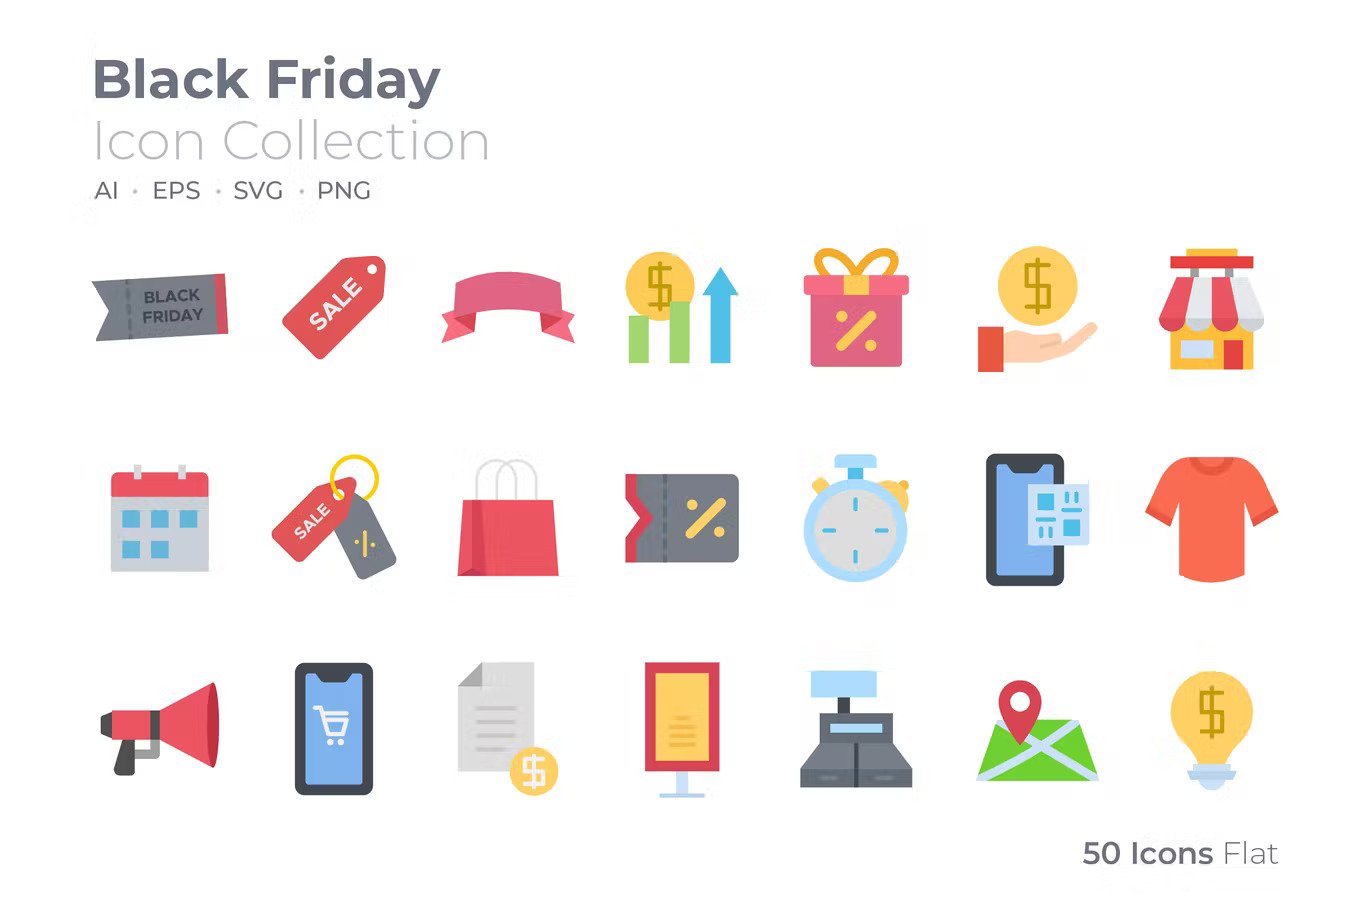 A black friday color icons collection